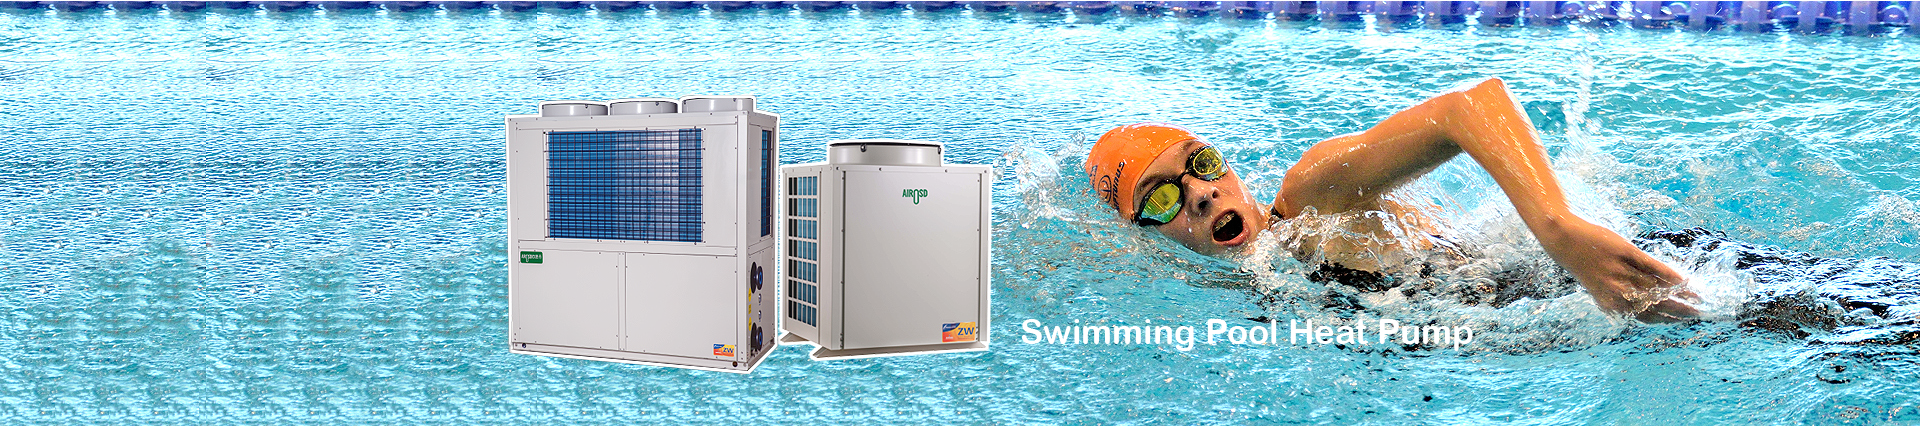 COMMERCIAL Swimming Pool heat pump